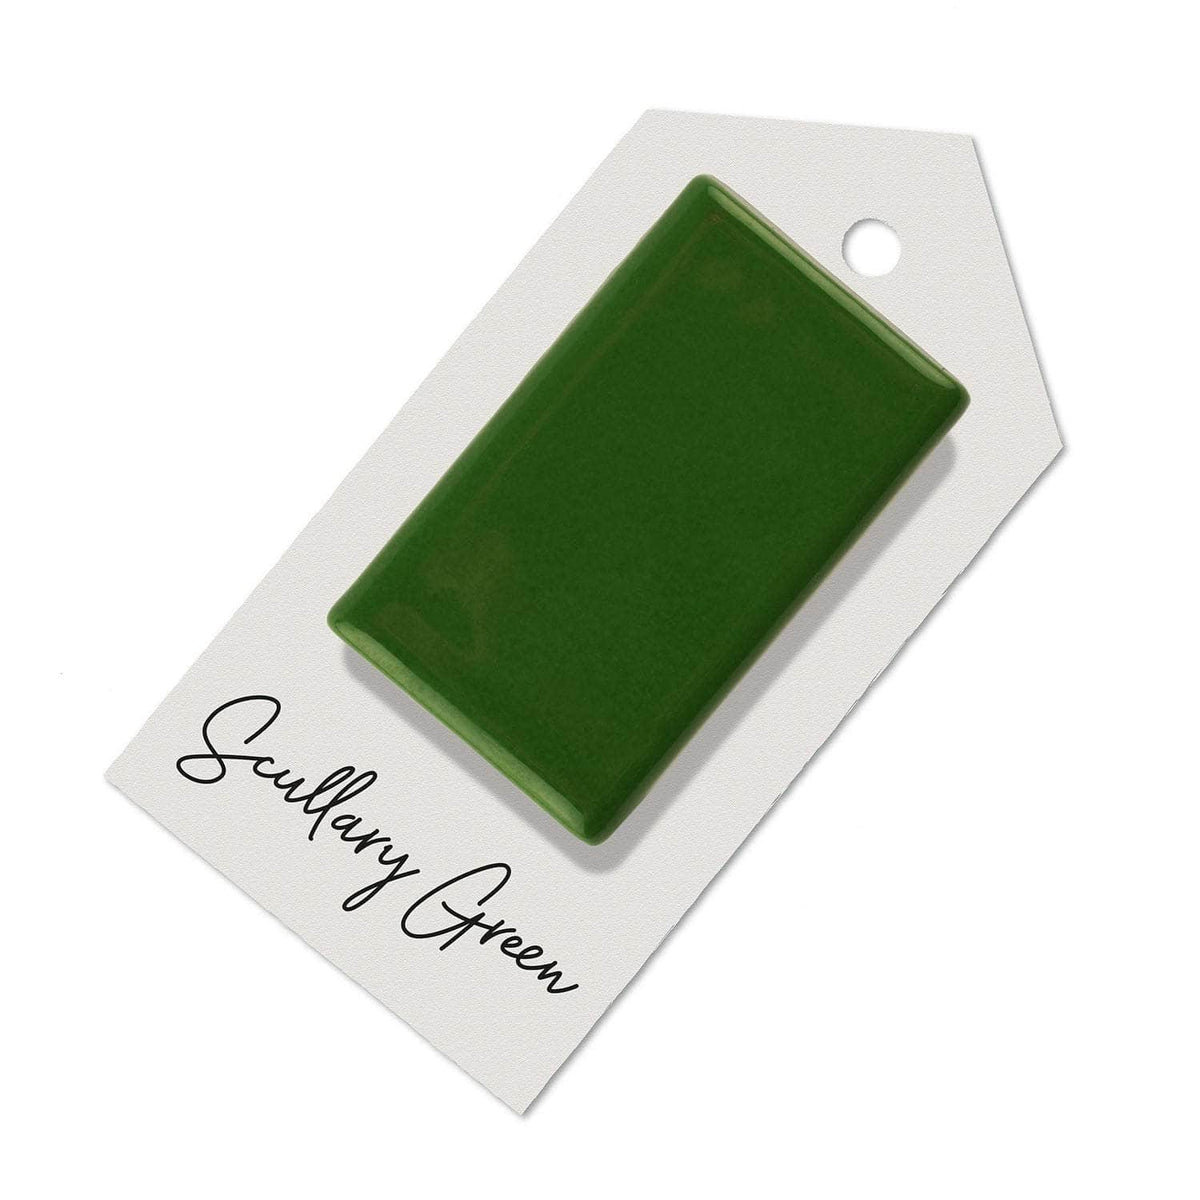 Scullery green sample for Aga range cooker re-enamelling &amp; reconditioned cookers